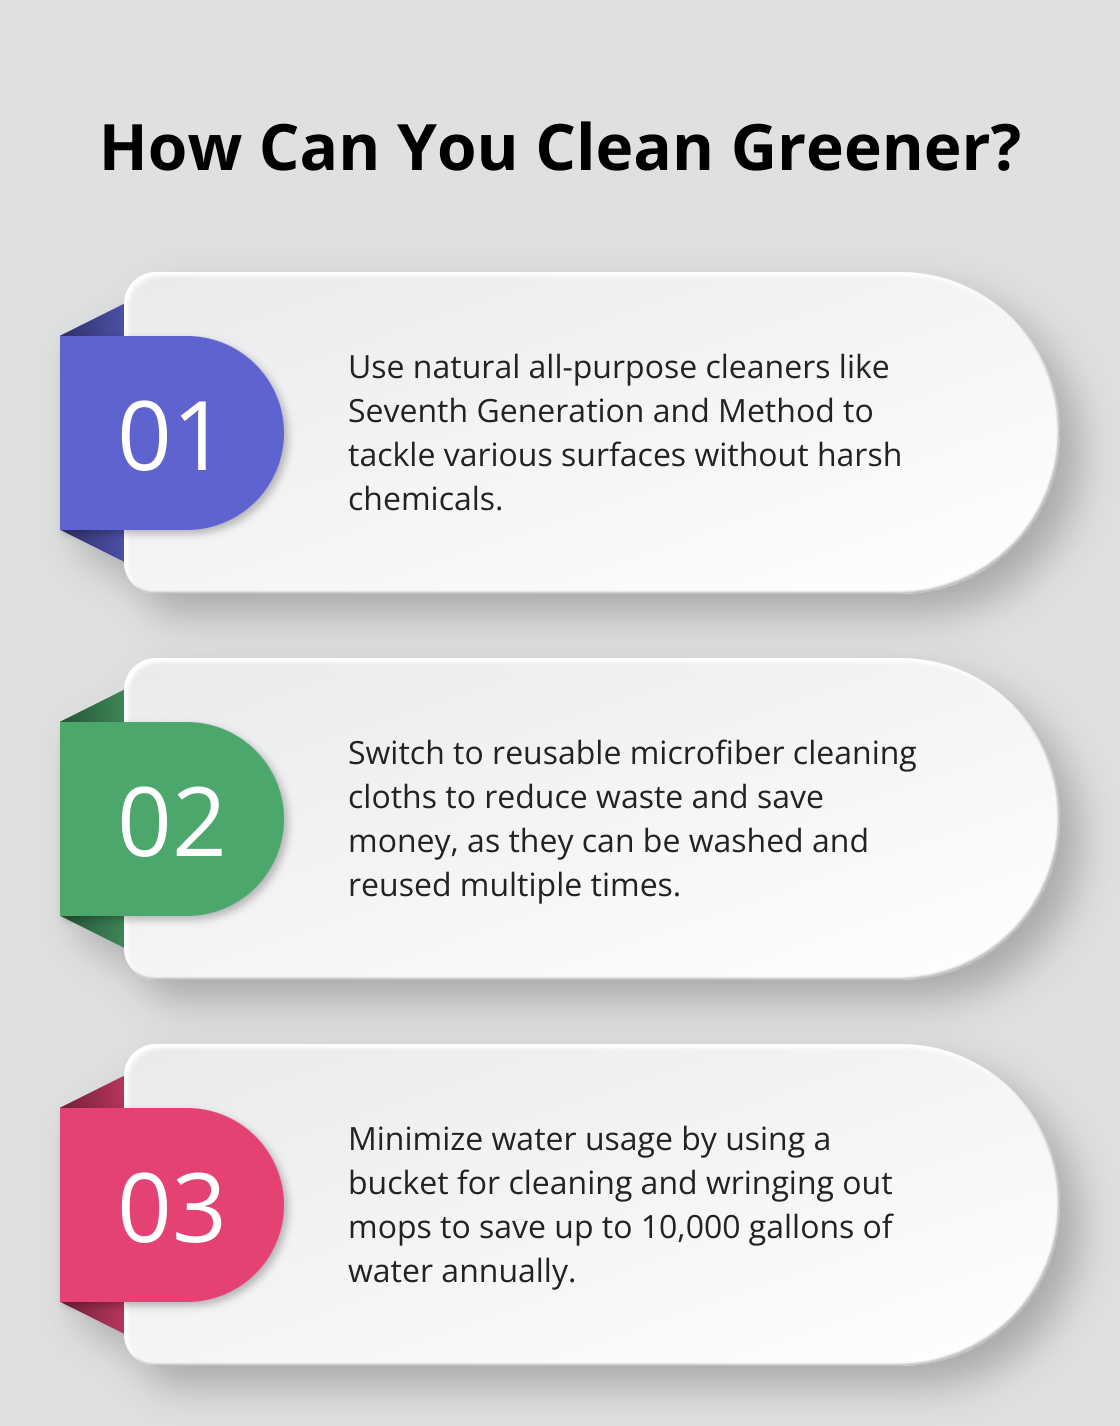 Fact - How Can You Clean Greener?